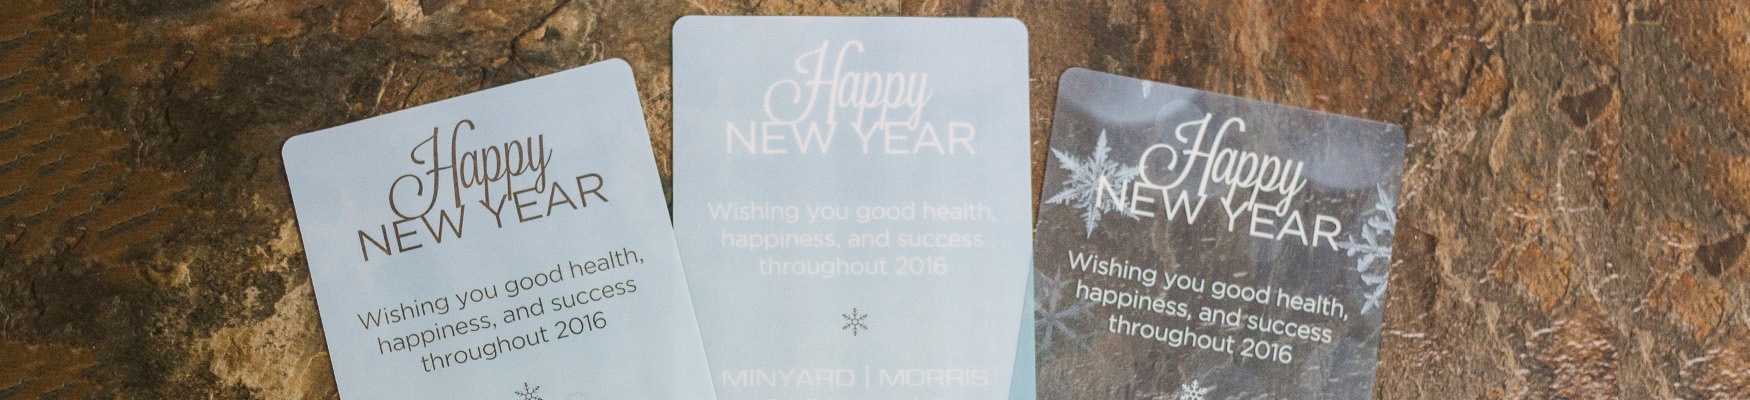 Corporate Holiday Cards on Clear Plastic